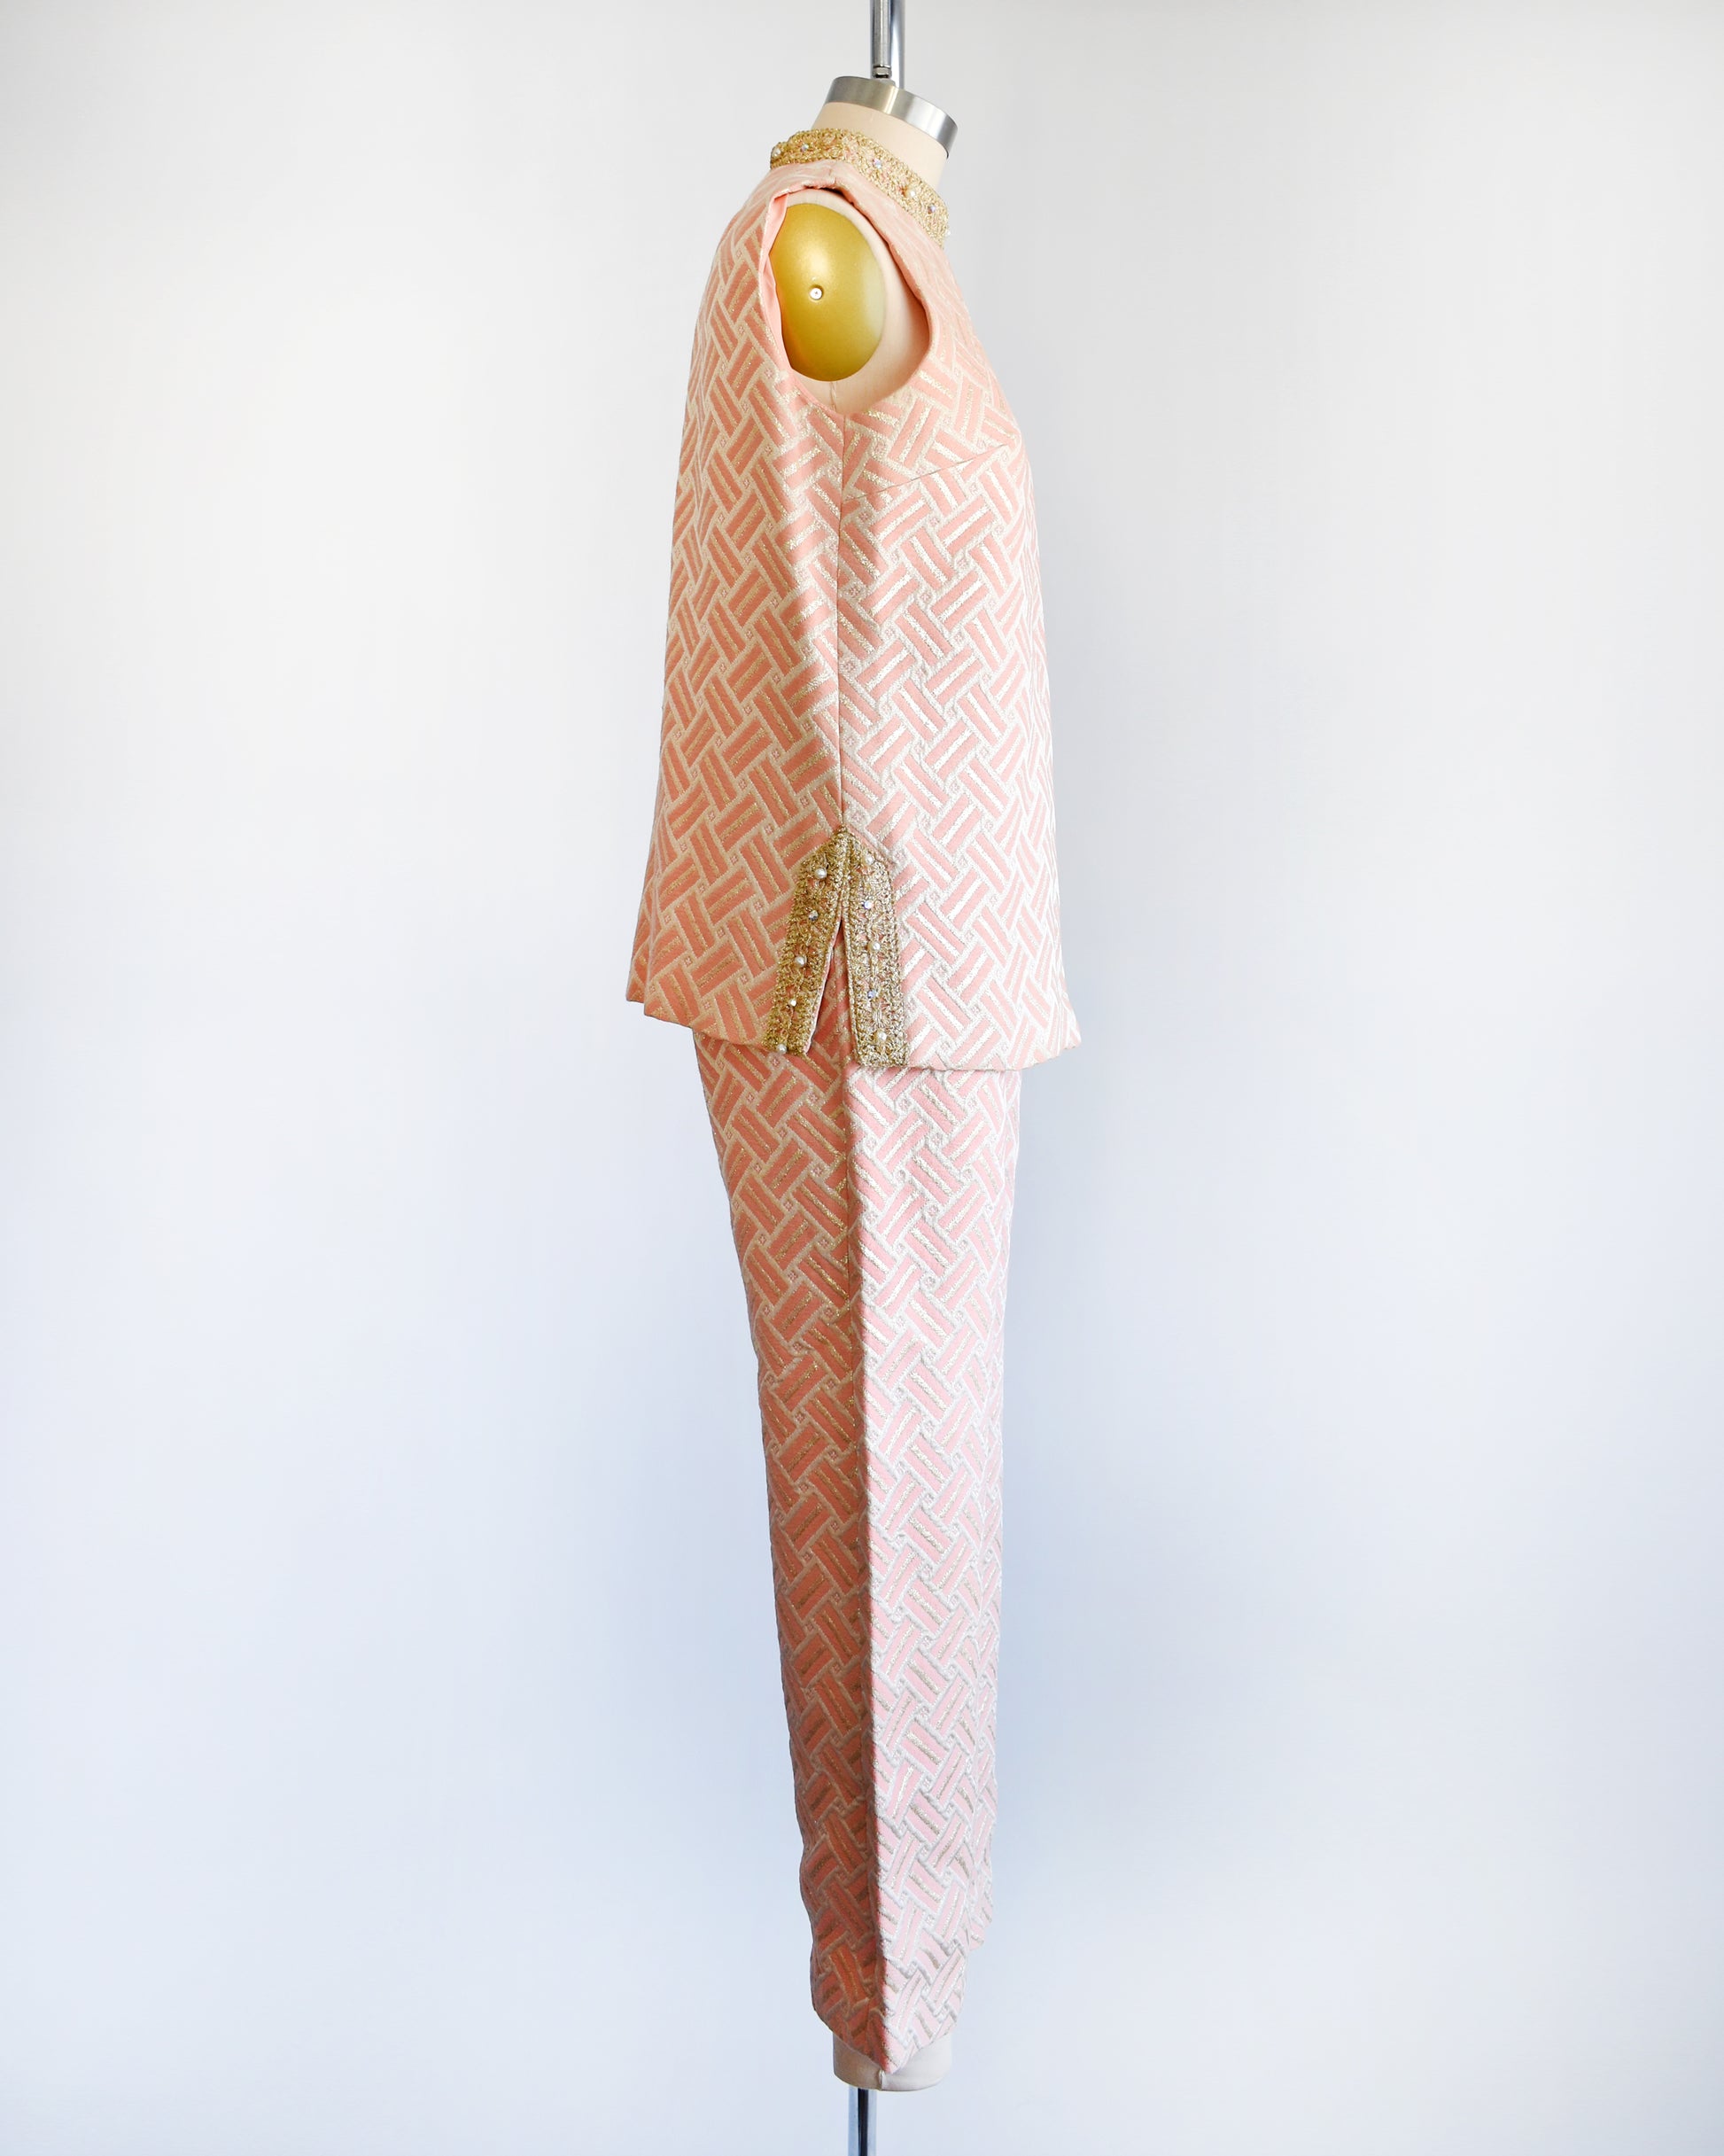 Side view of a vintage 1960s pink and gold mod pant set with a metallic gold collar with rhinestone trim. The set includes a matching top with metallic gold trim on the side